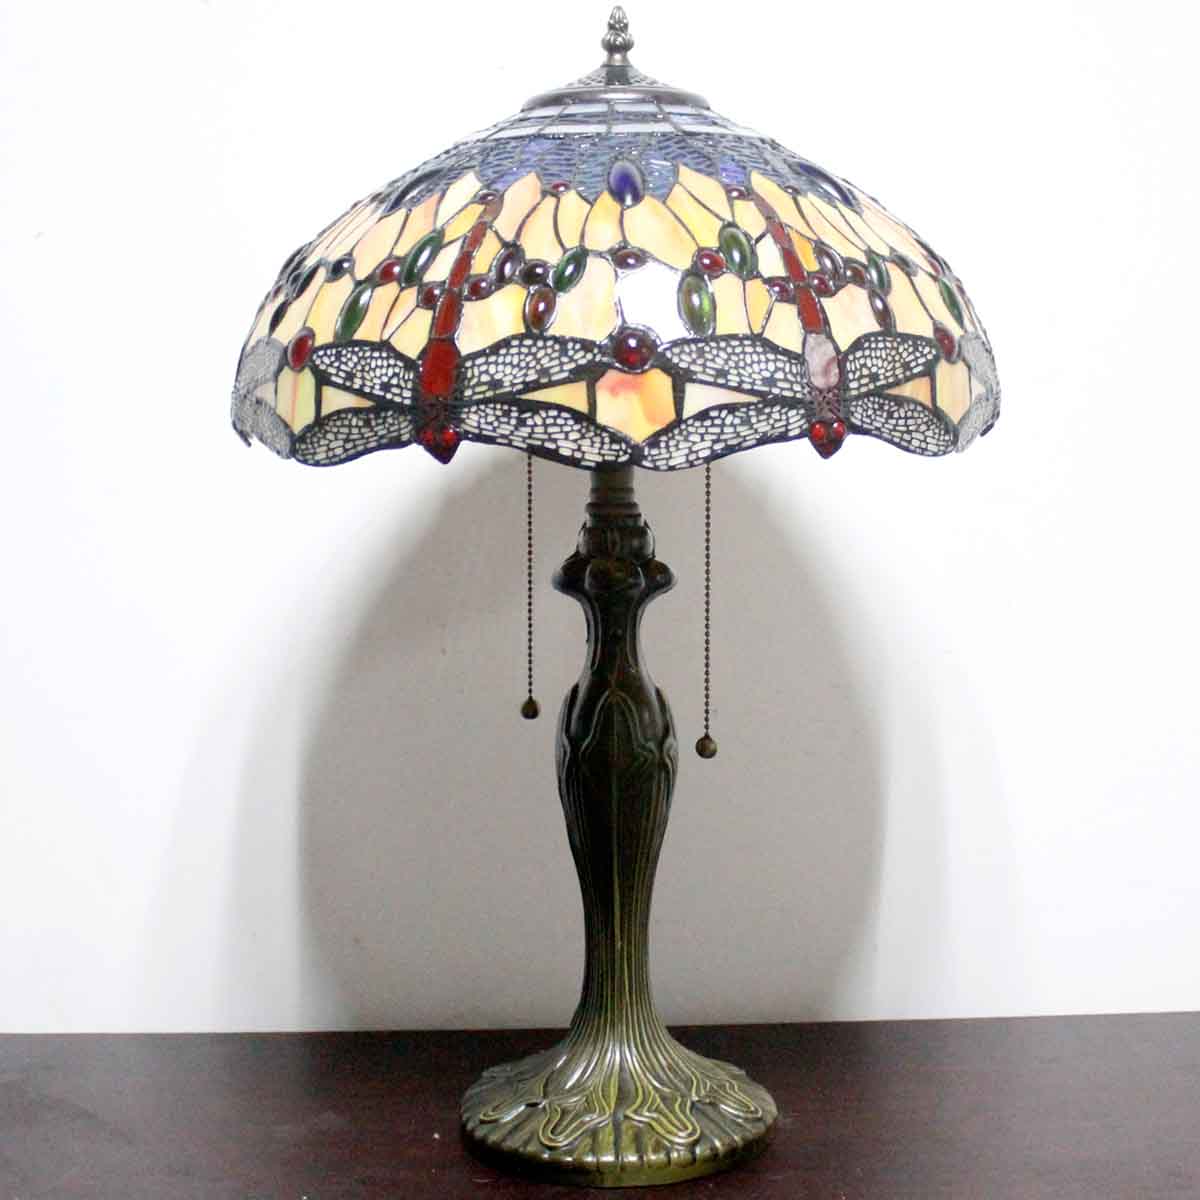 Stained Glass Lamp Werfactory® Tiffany Style Orange Blue Dragonfly Desk Reading Light